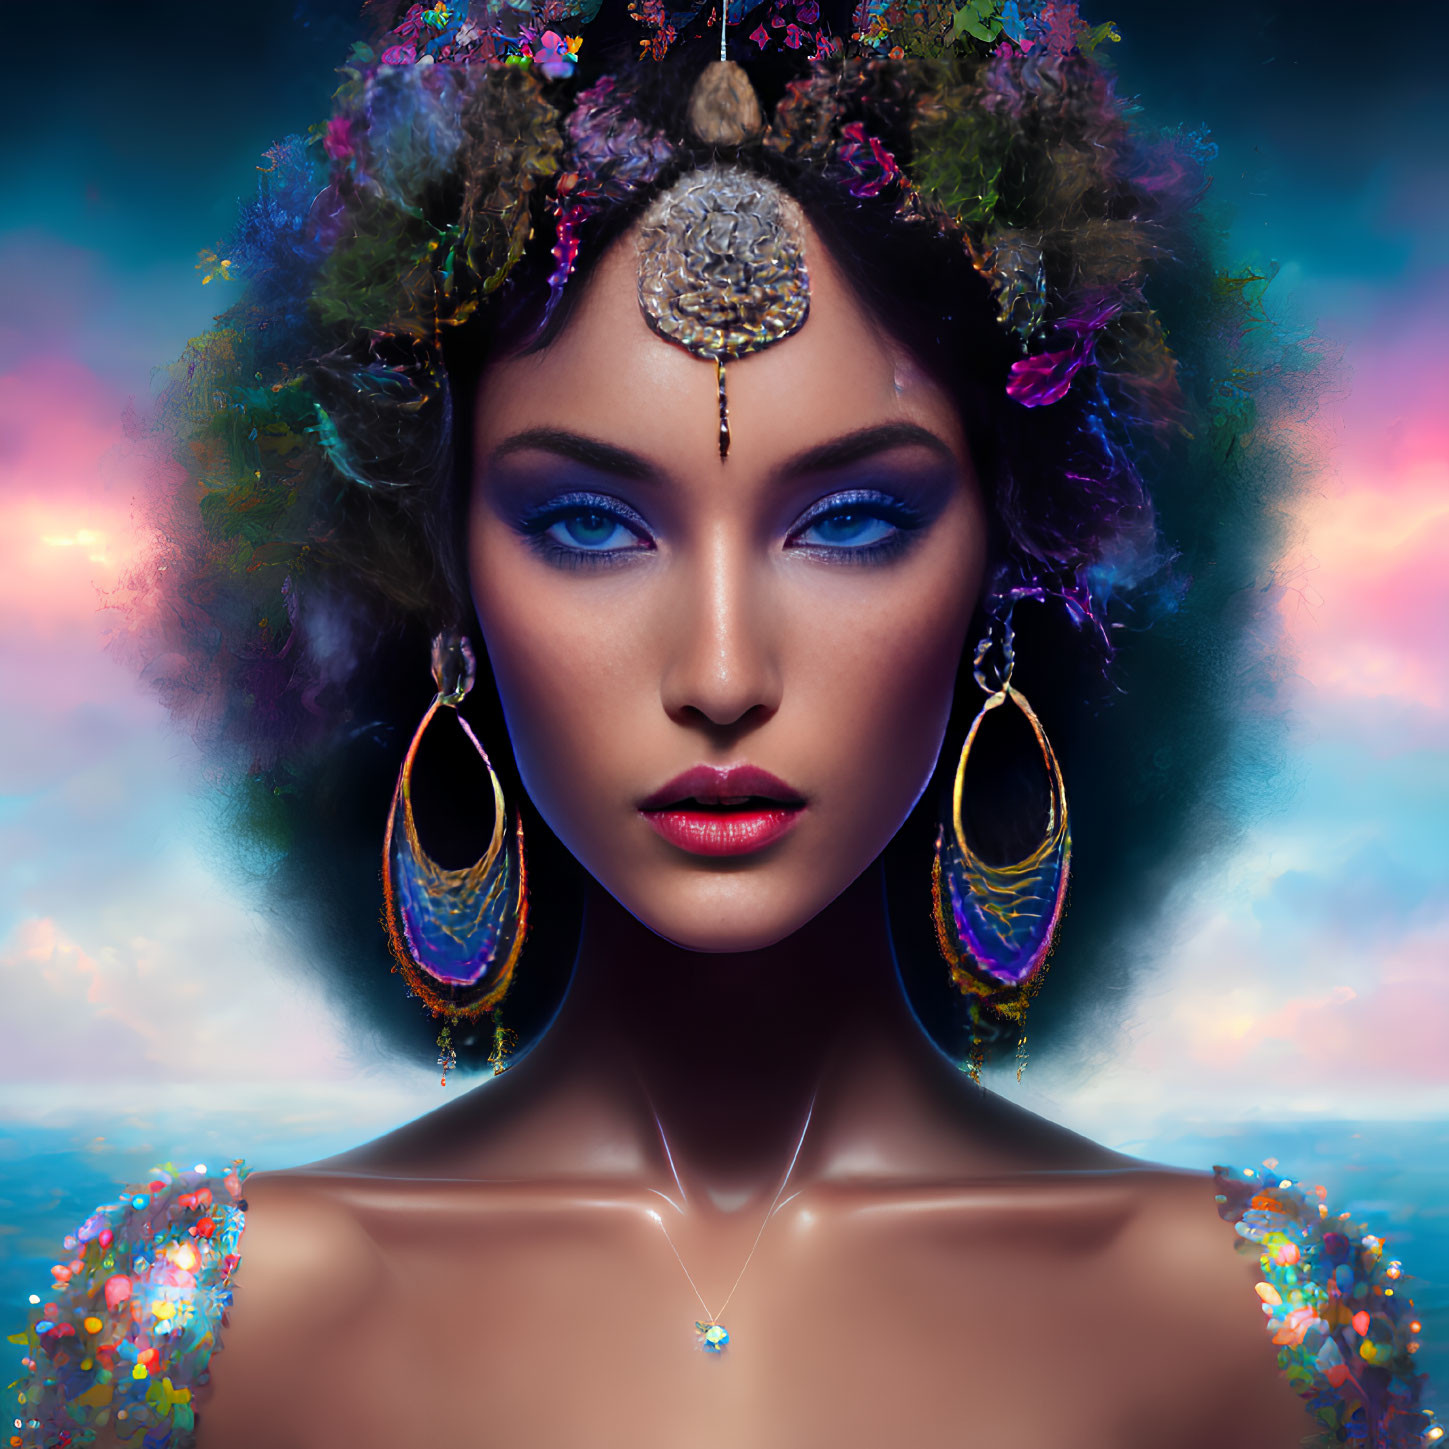 Digital artwork featuring woman with blue eyes, floral crown, jewelry, and body accents against cloudy sky